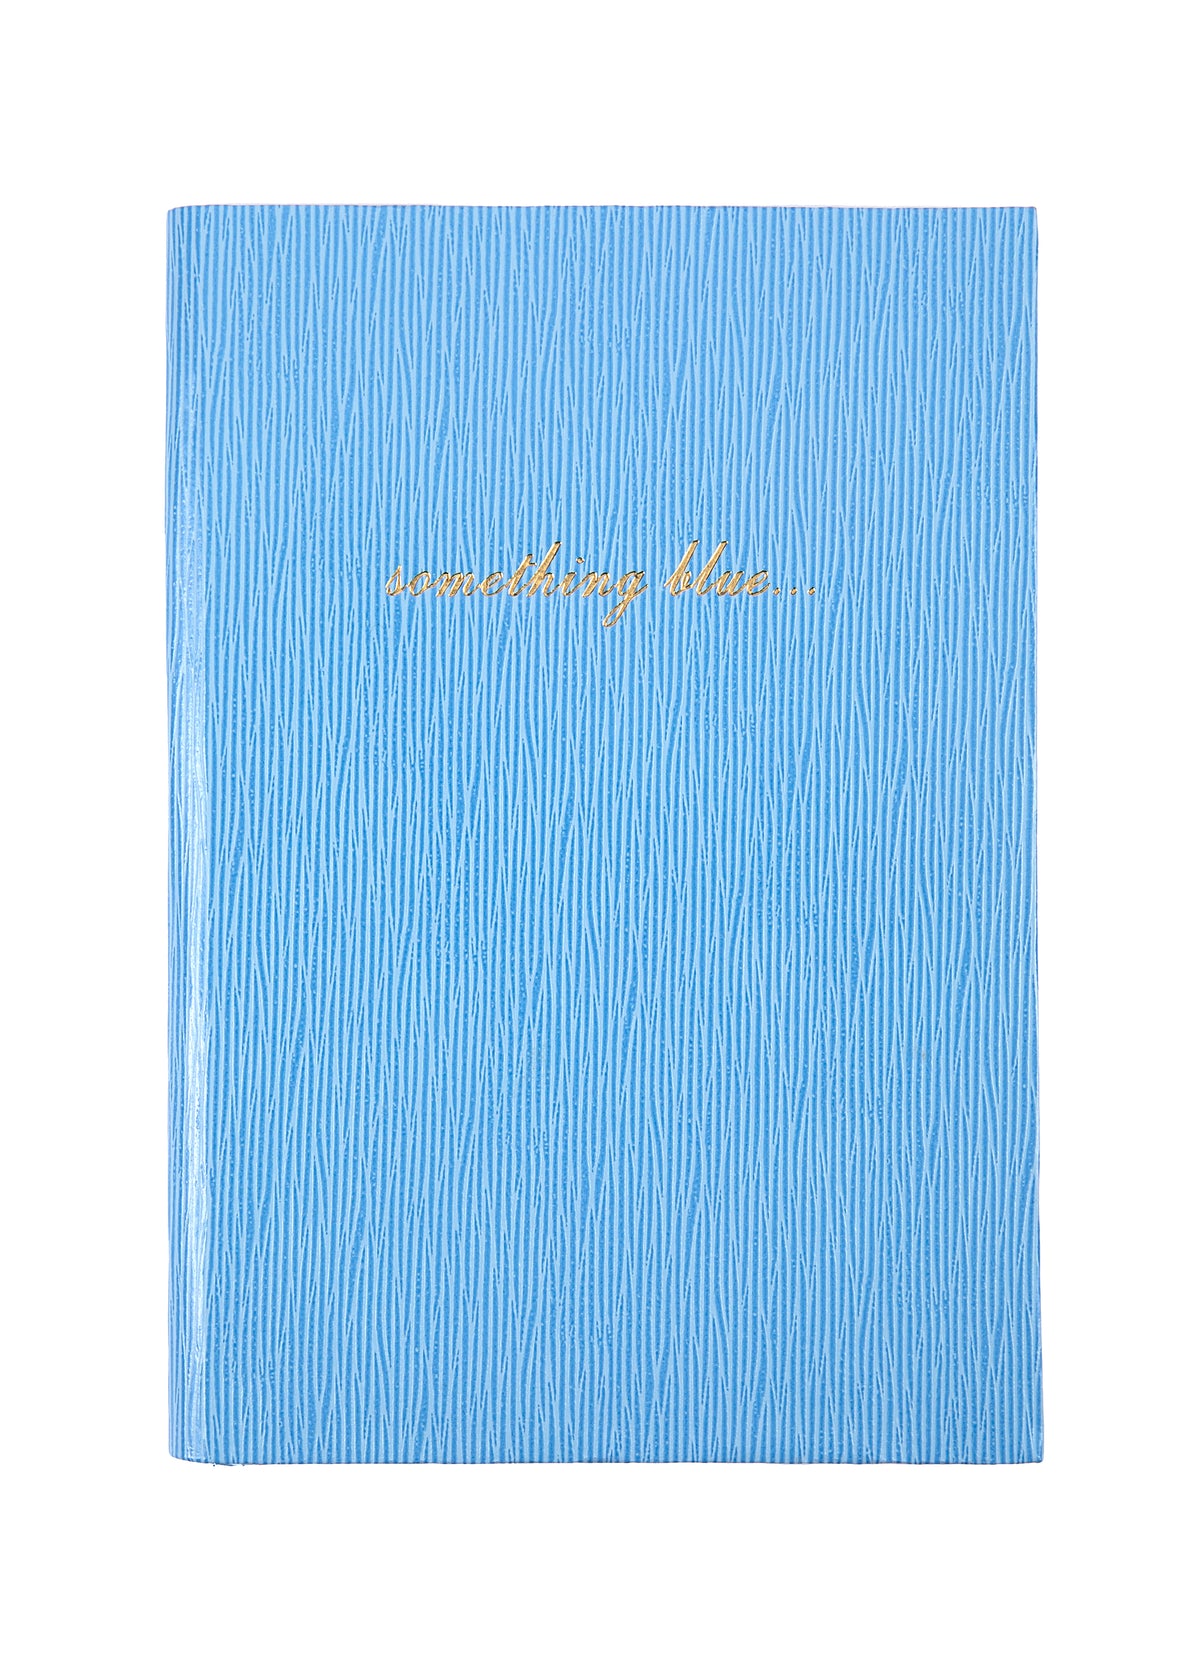 Something Blue, A5 Notebook